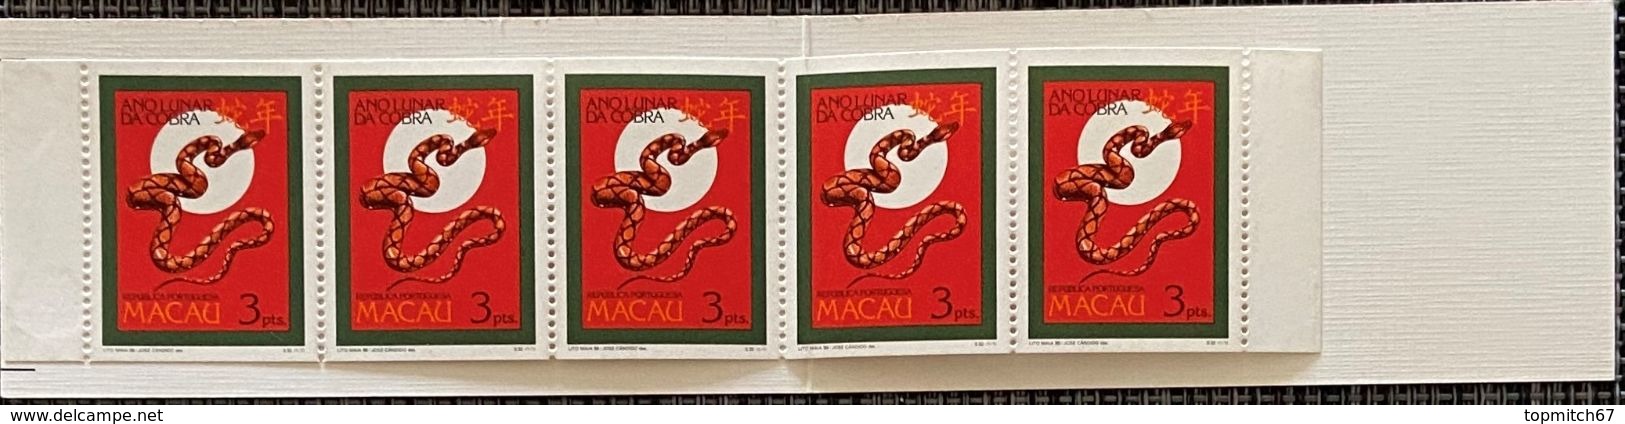 MAC2526MNH-Lunar Year Of The Snake Booklet Of 5 MNH Stamps - Macau - 1989 - Libretti